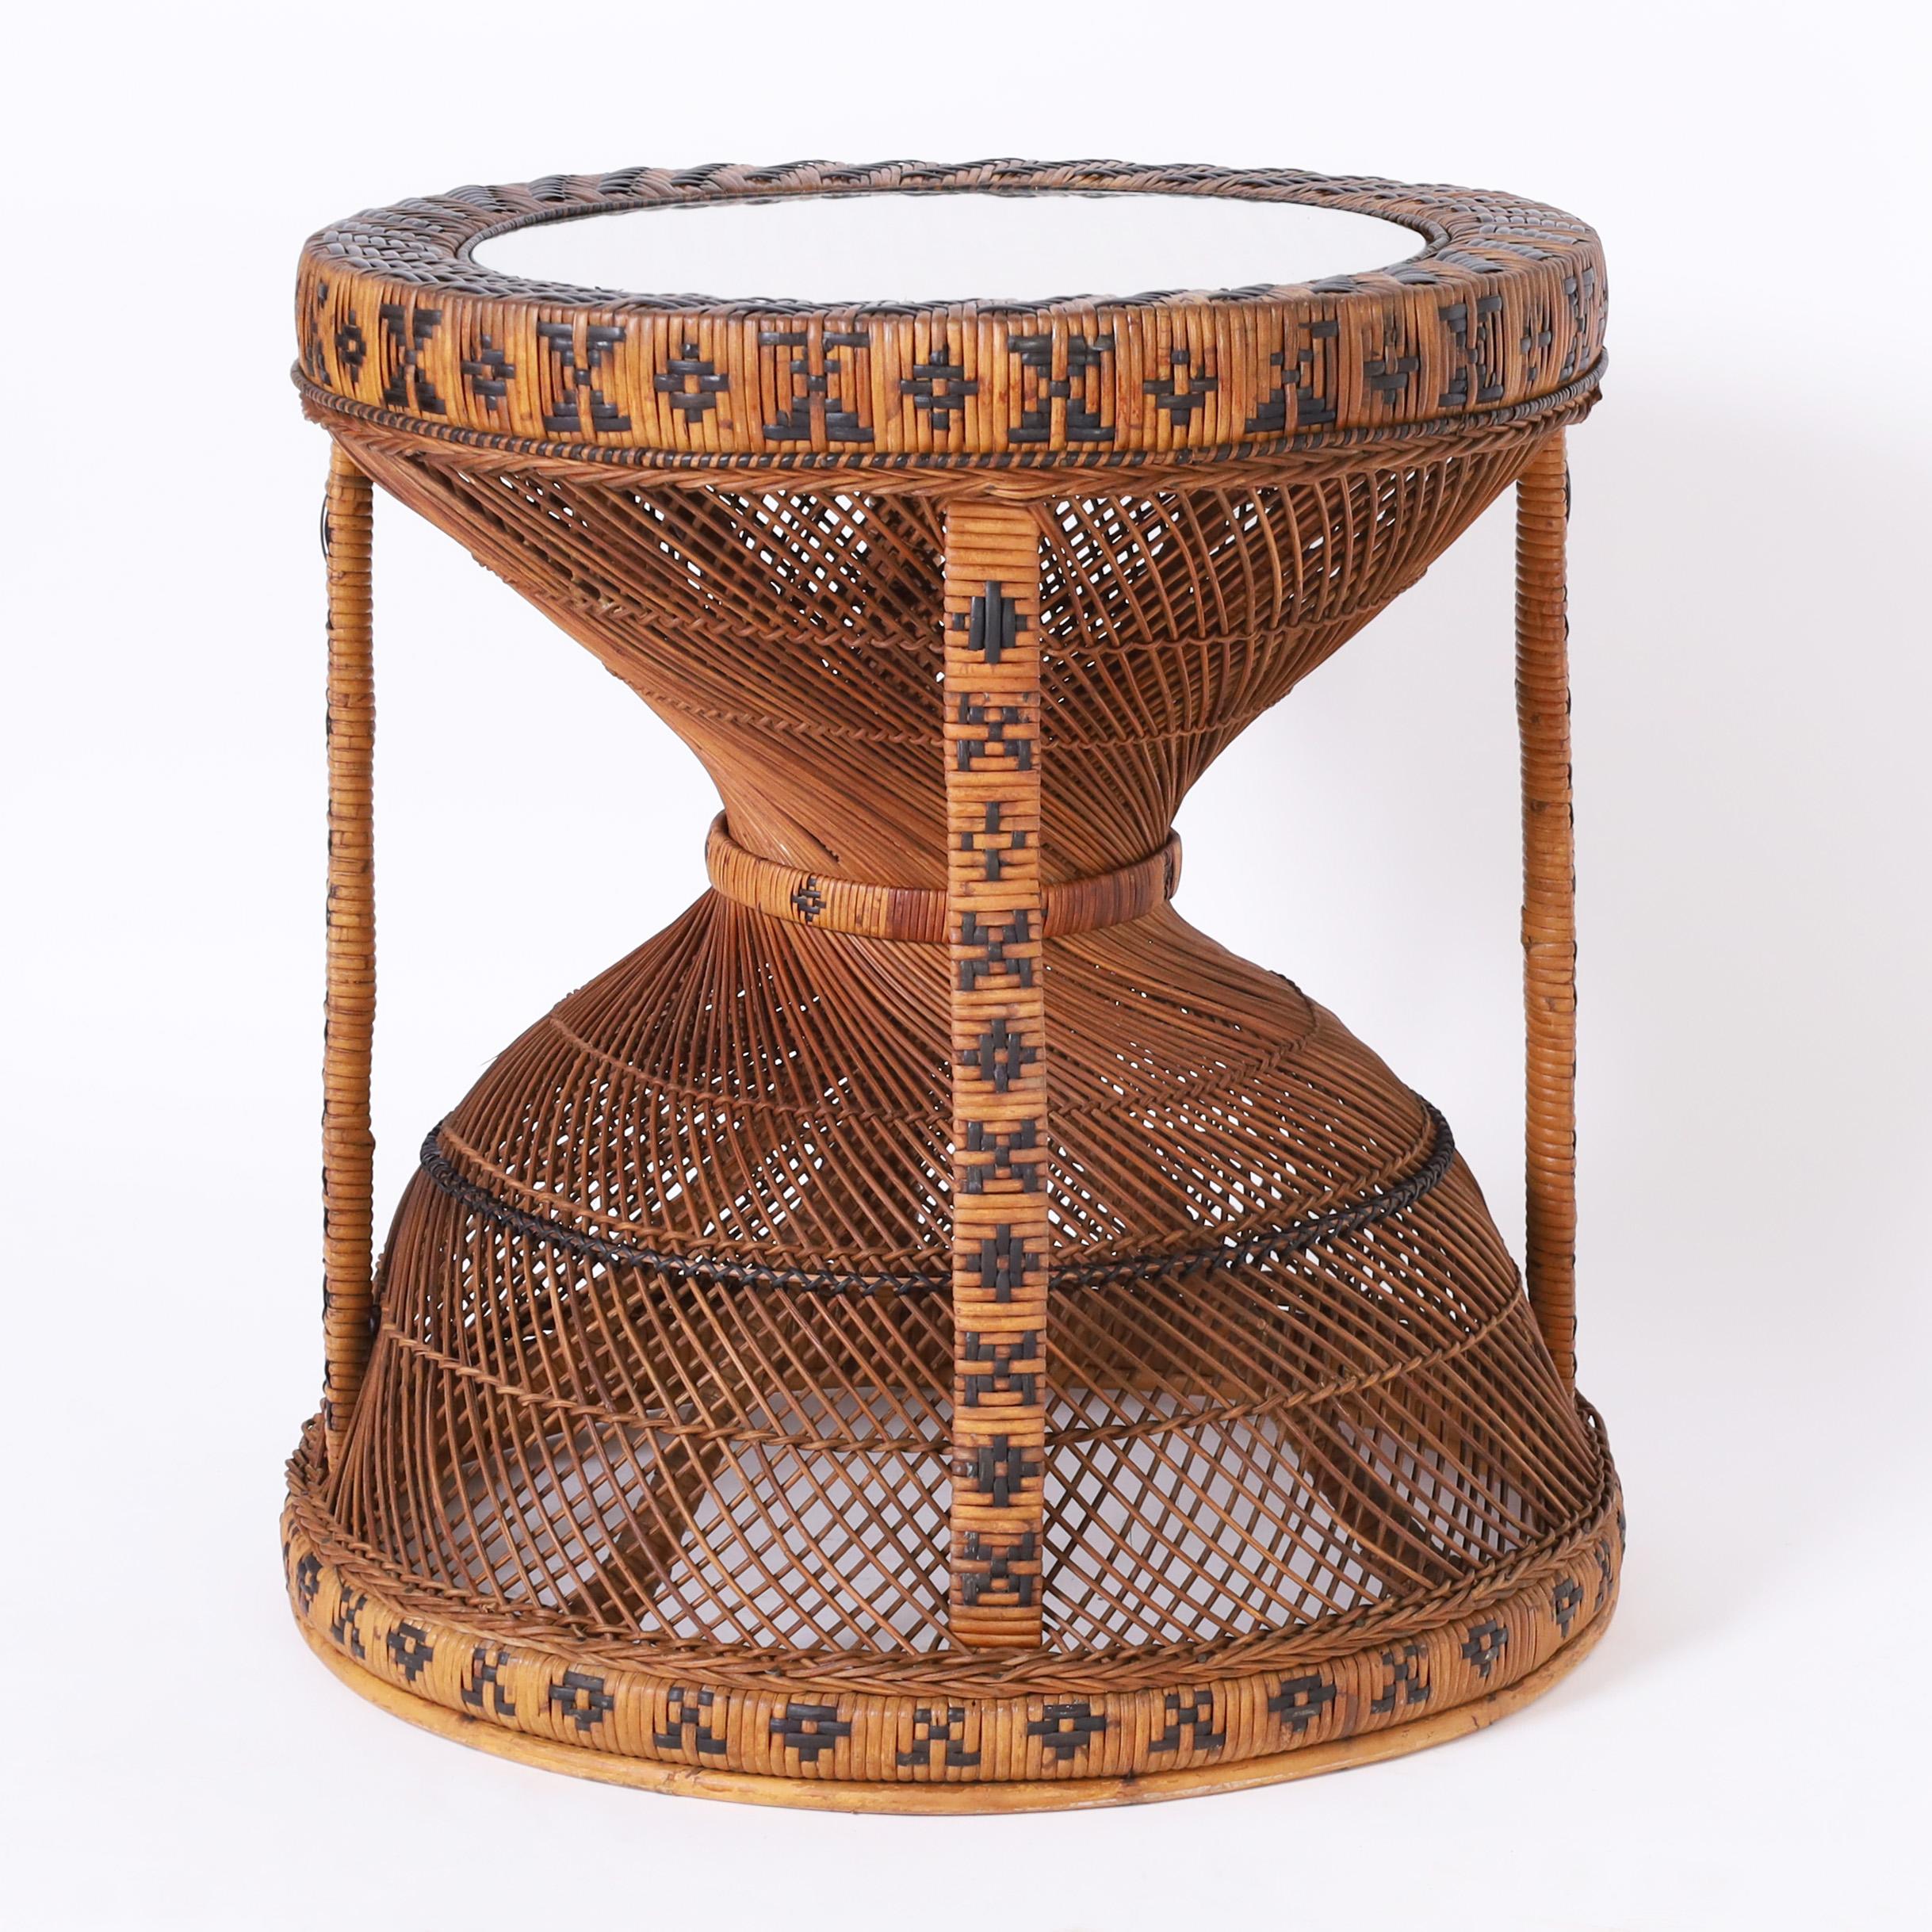 Standout vintage Anglo Indian stand handcrafted in wicker and reed over a wood frame with a caned top under inset glass over an hourglass form base decorated with geometric symbols.